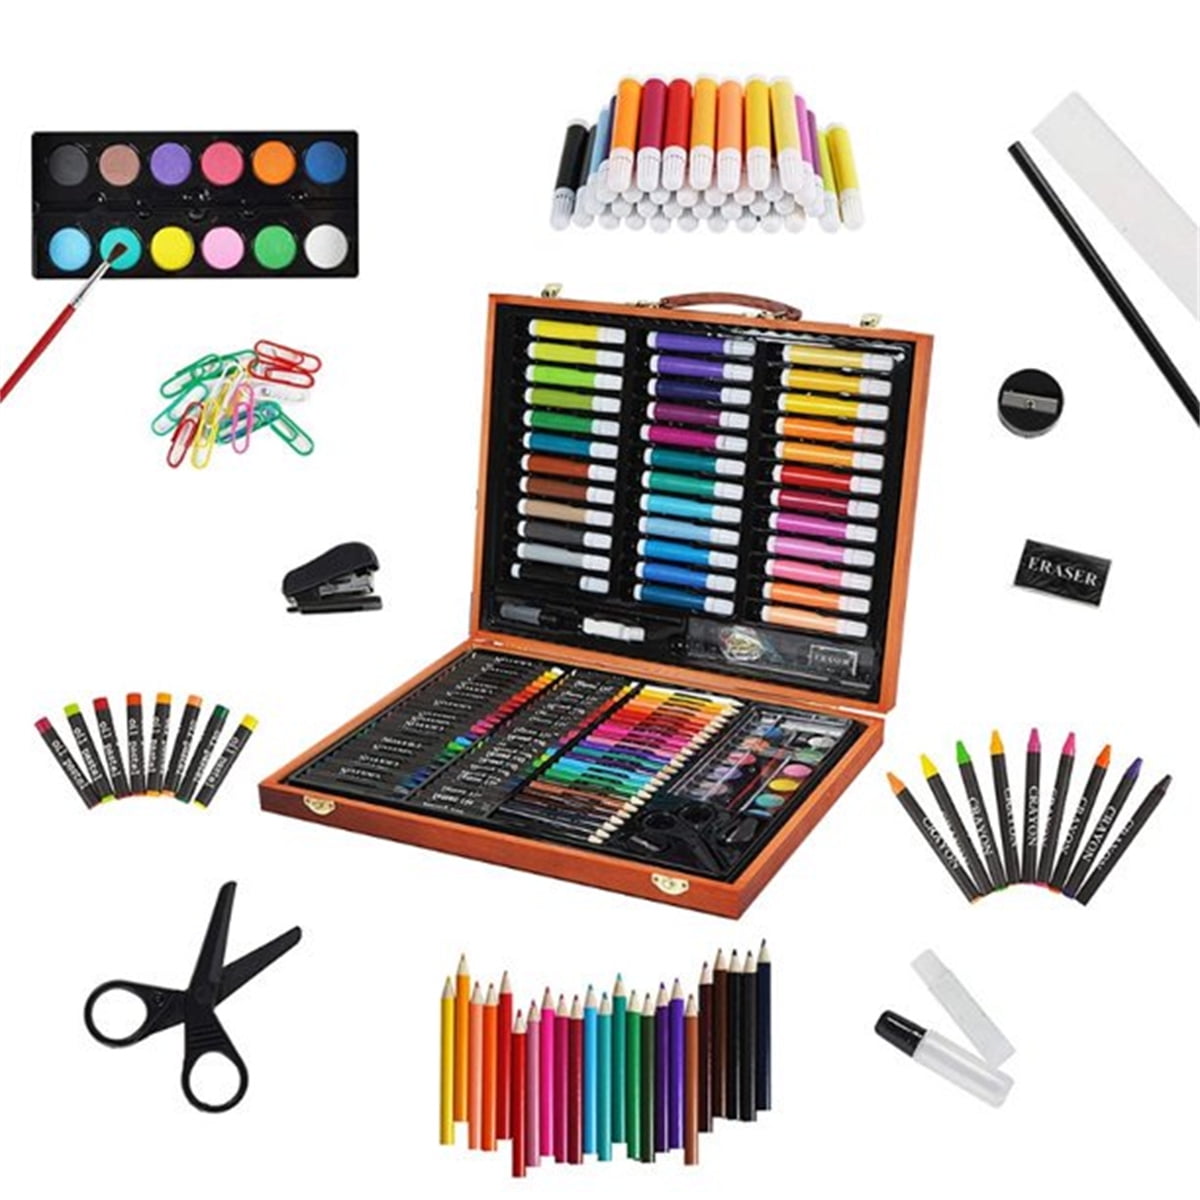 Moiky Art Set for Kids,150 Piece Deluxe Art Supplies Kit,with Paint Markers  Pens/Crayons/Oil Pastels/Colored Pencils/Watercolor Paint Portable Case 